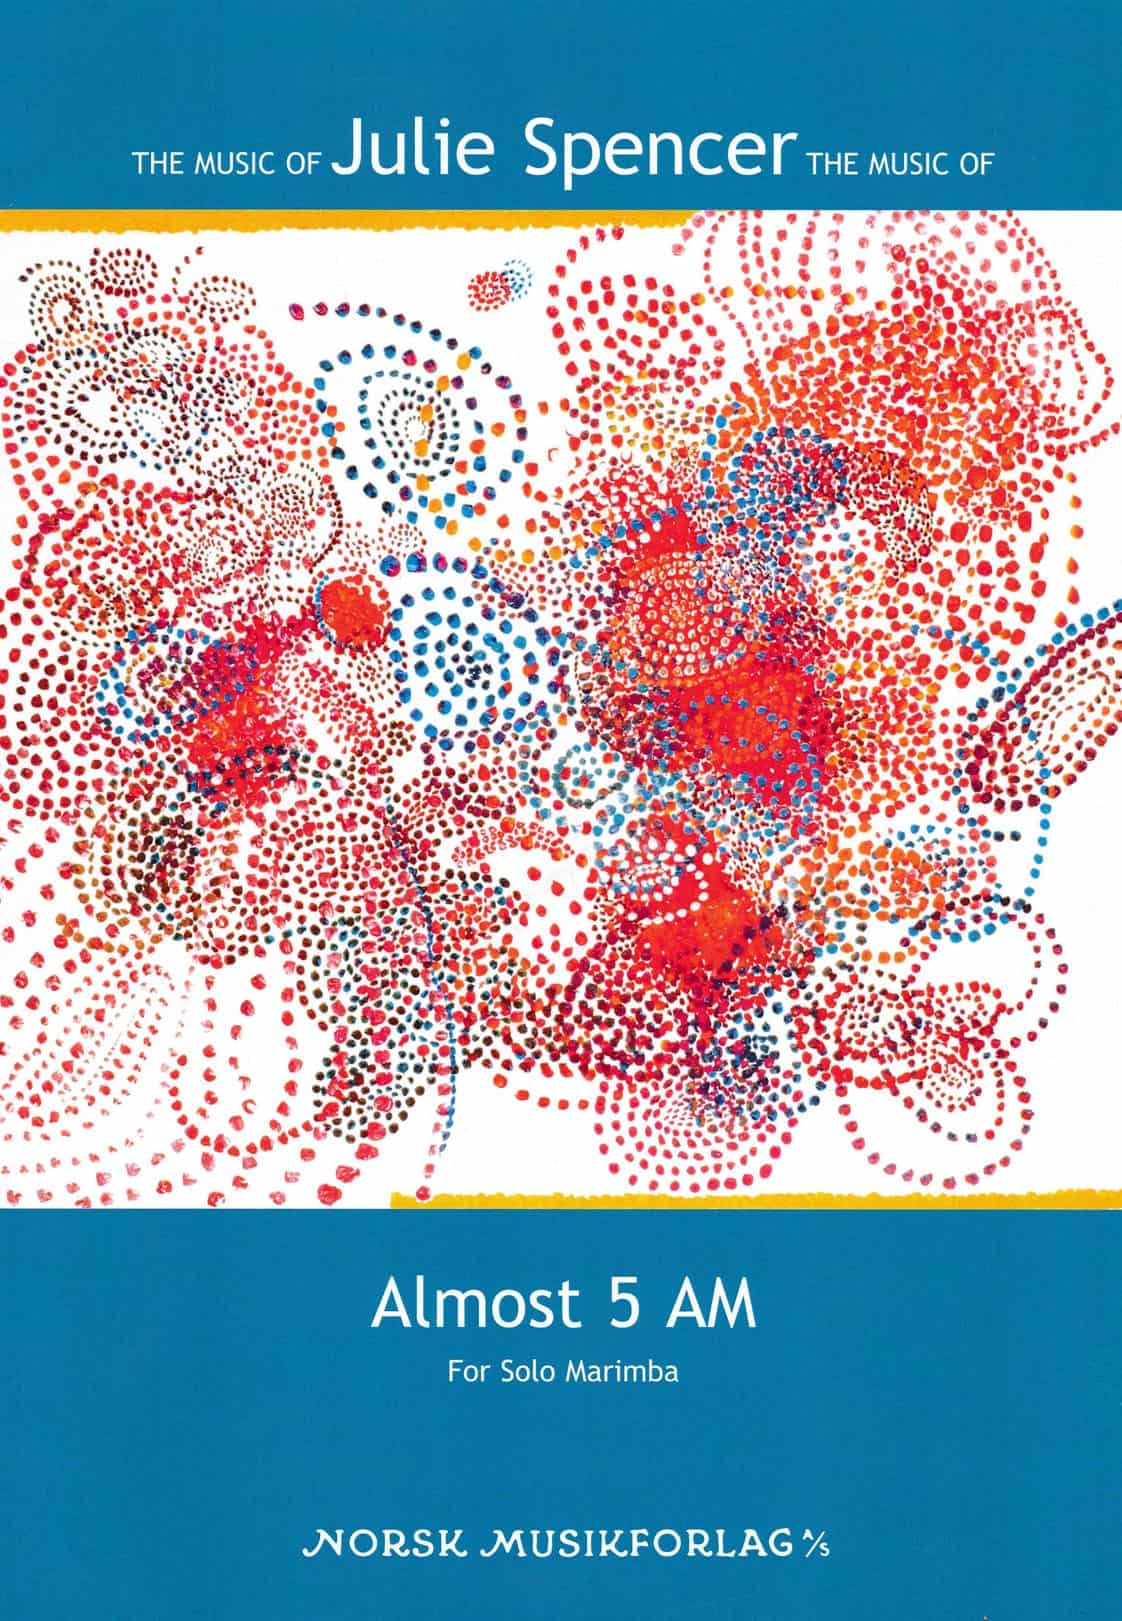 Almost 5 AM by Julie Spencer